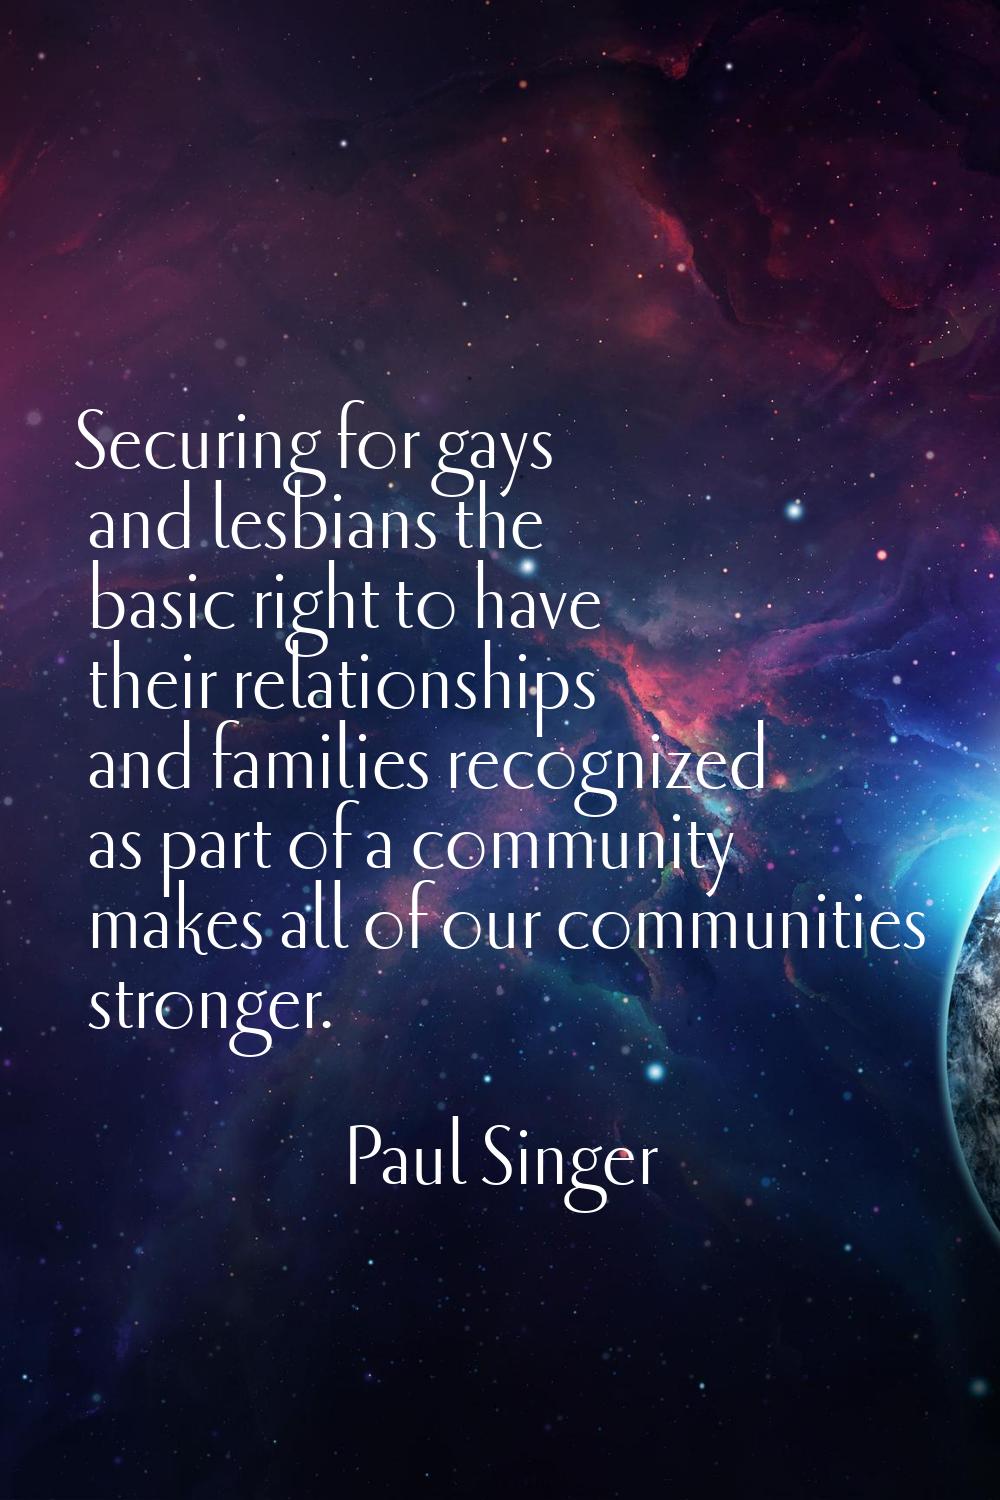 Securing for gays and lesbians the basic right to have their relationships and families recognized 